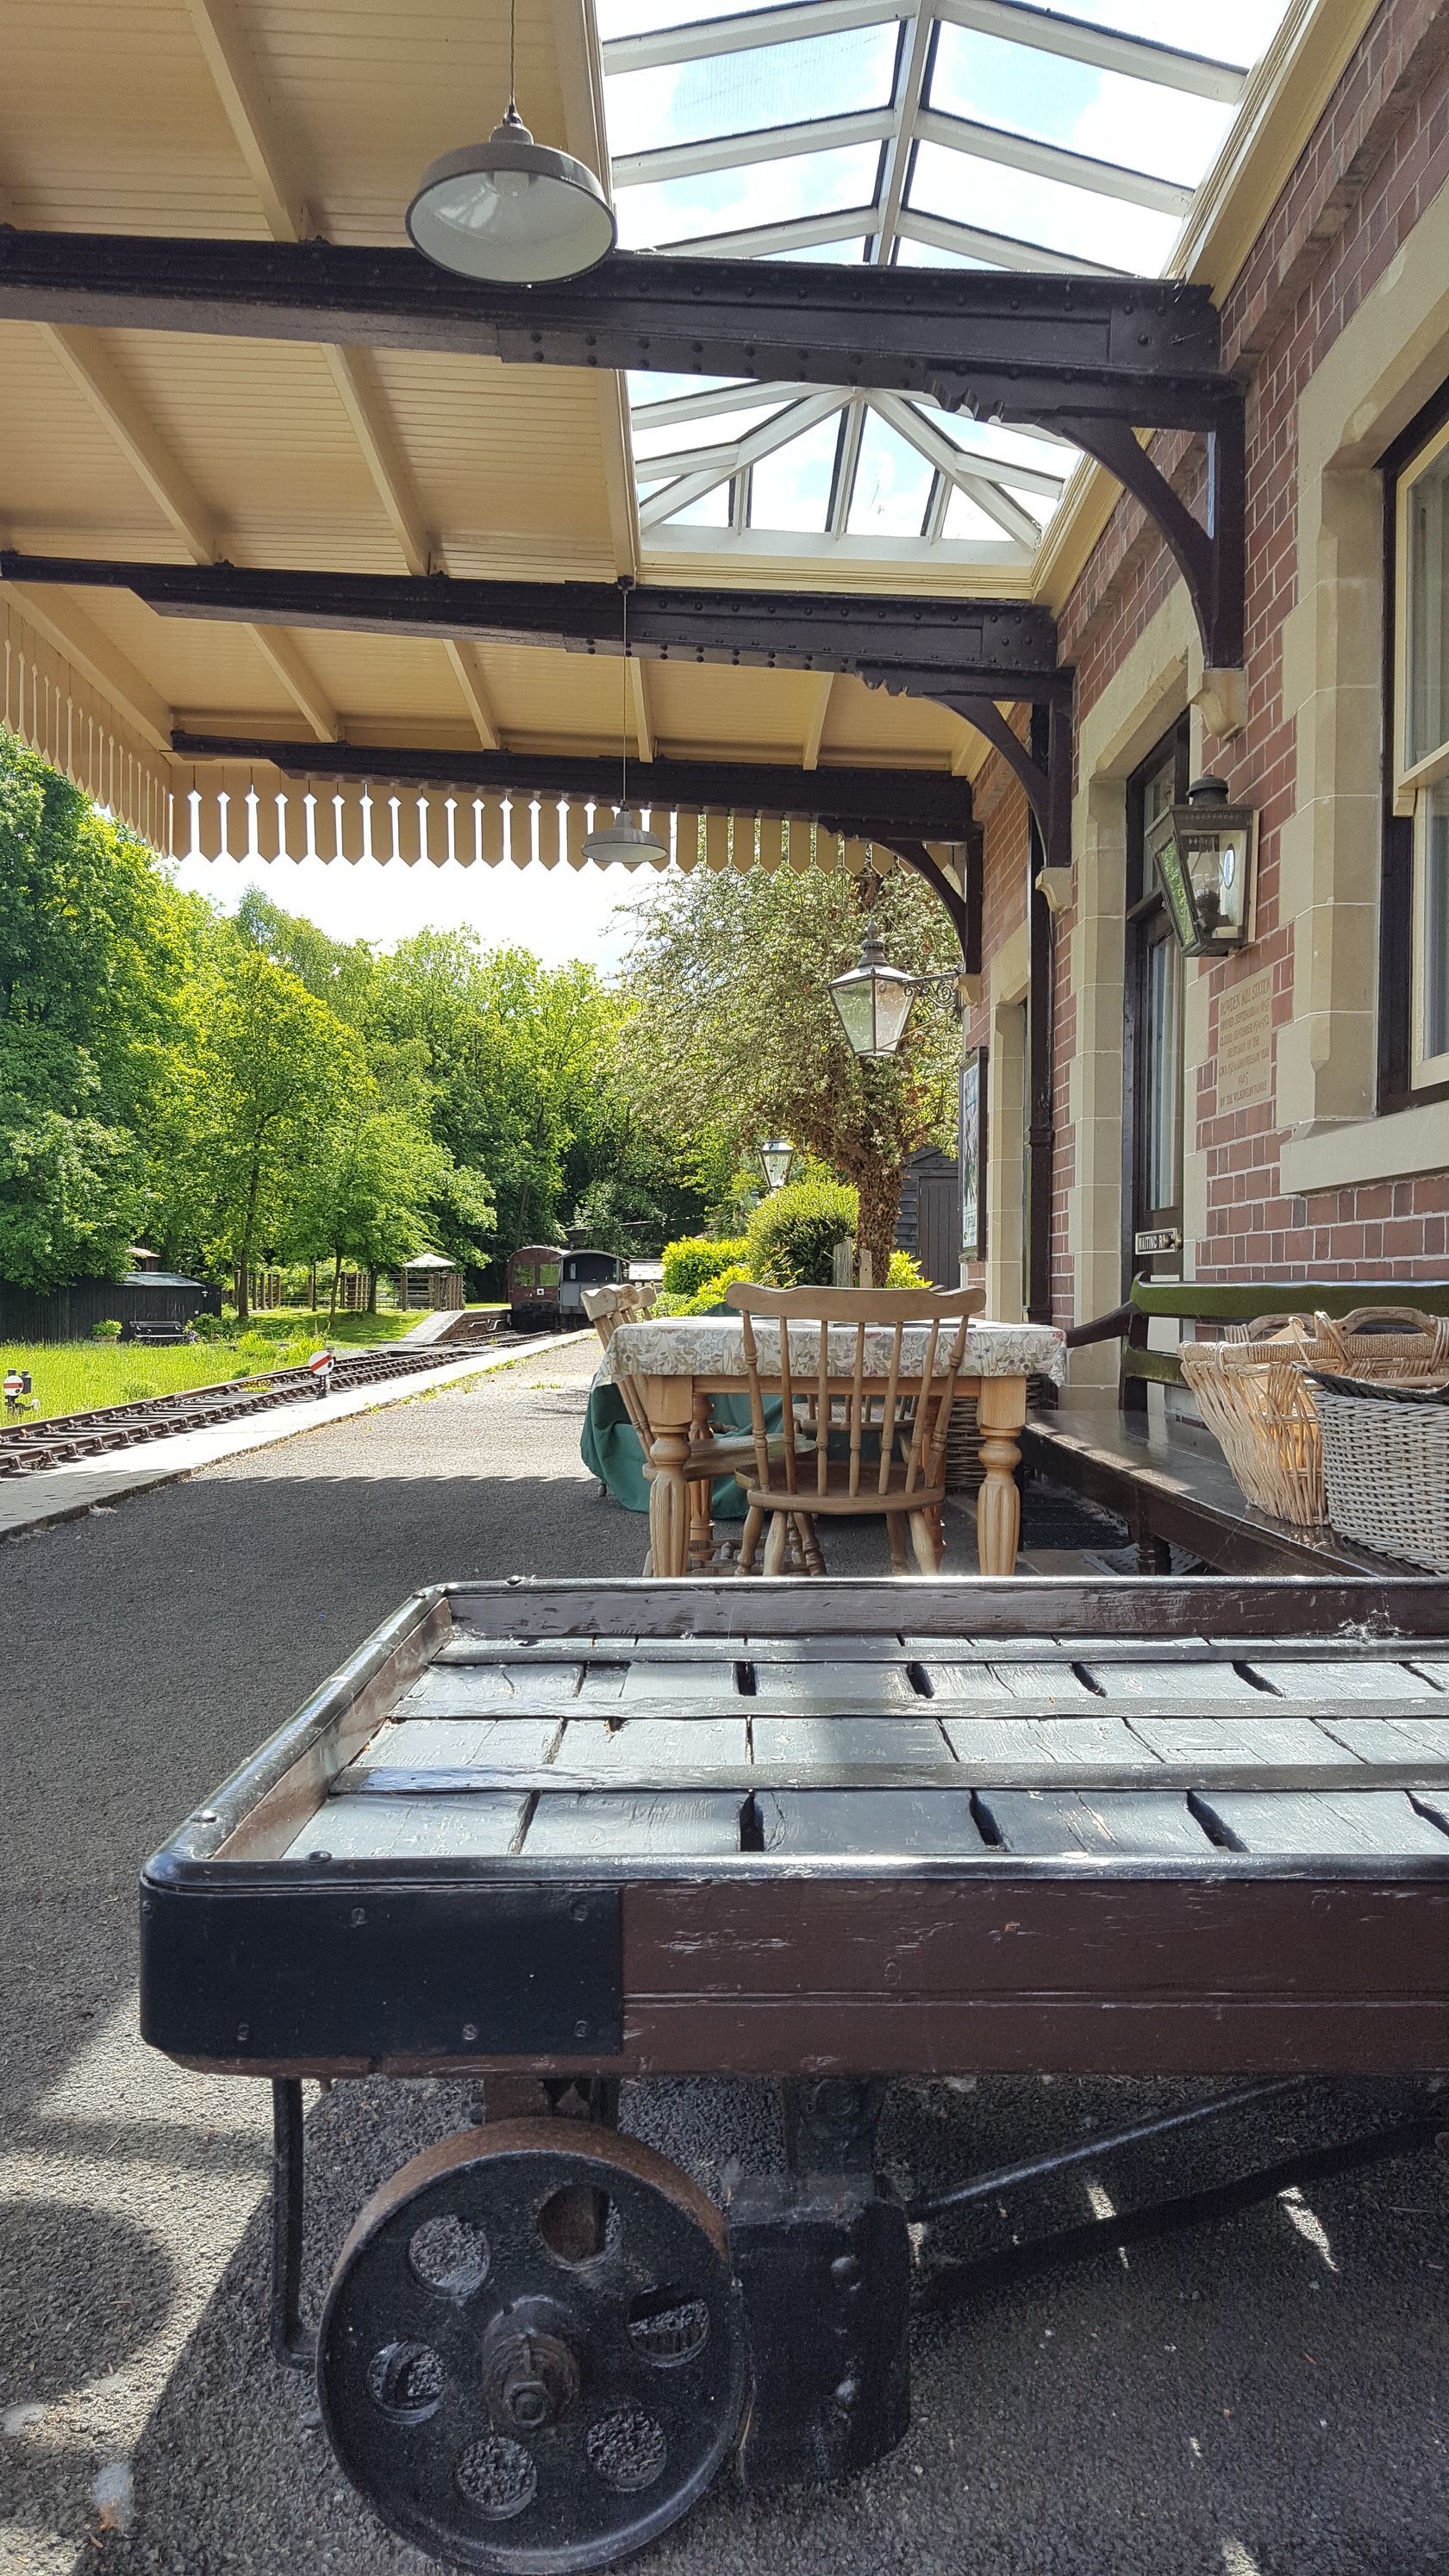 Rowden Mill Station, the fabulous canopy at the station, great for alfresco dining. It also houses our GWR luggage trolley